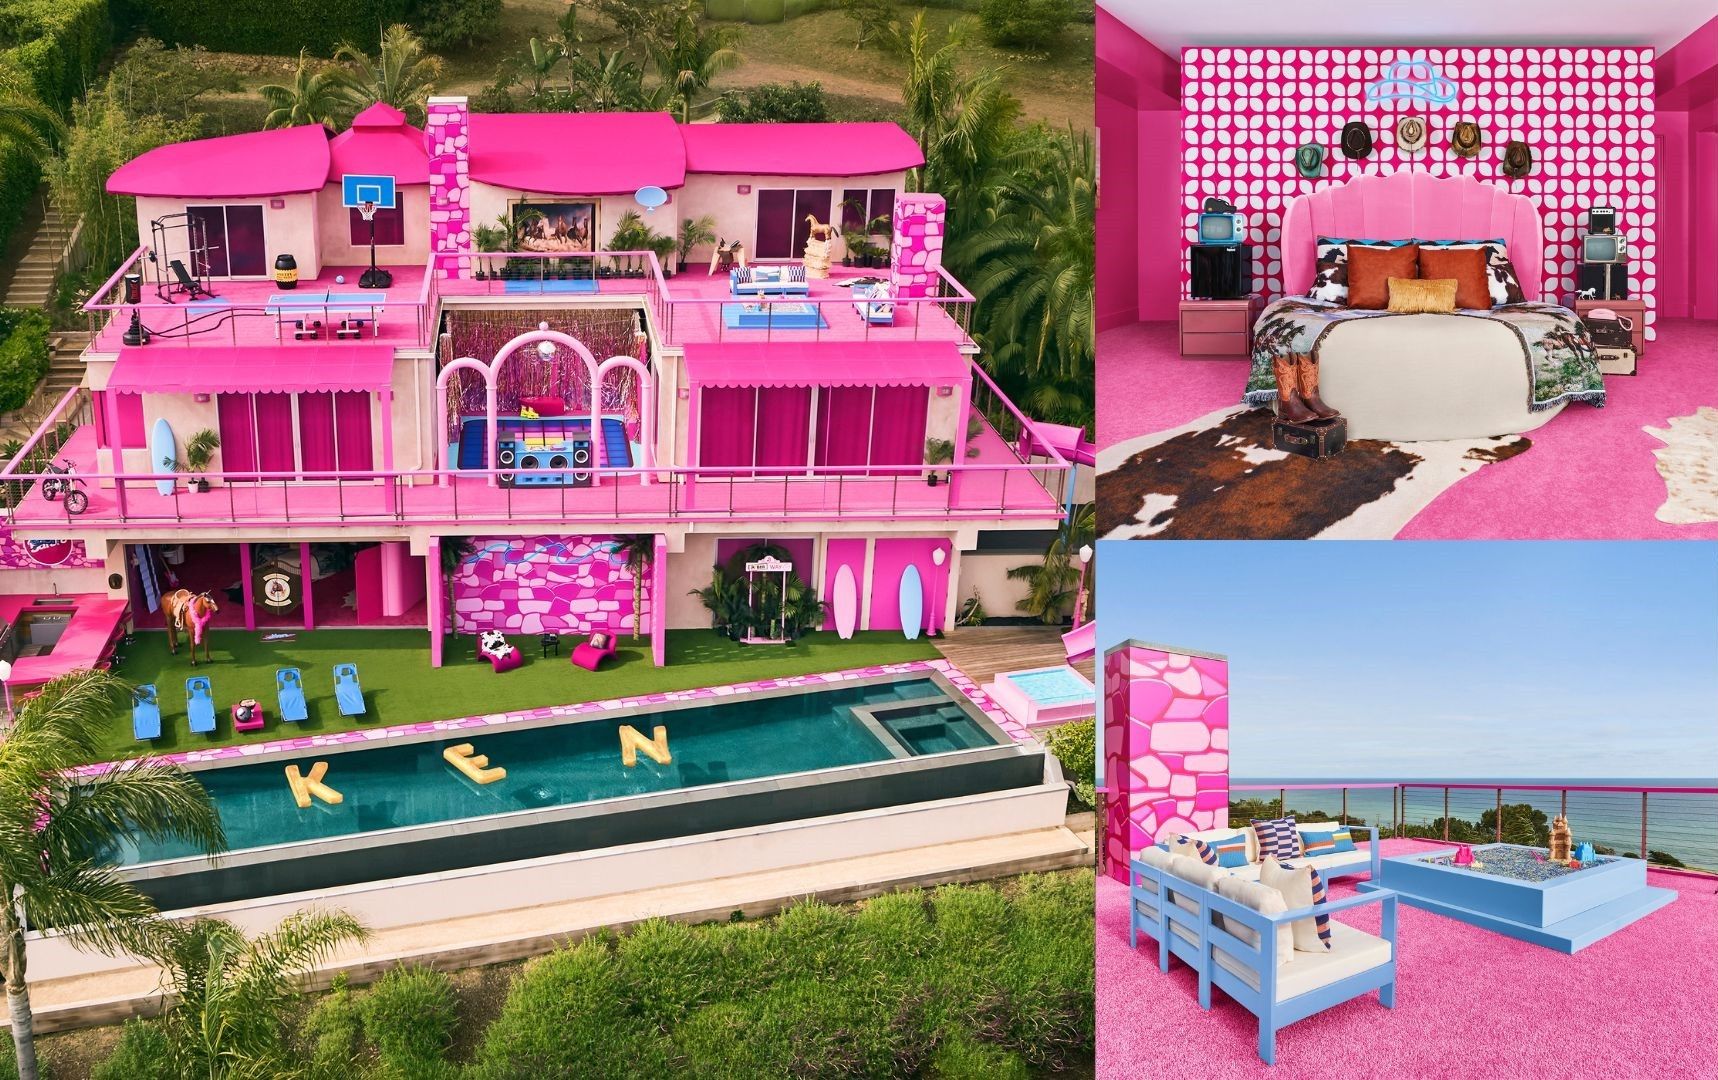 Barbie's Malibu Dreamhouse: How to have free stay with 'Ken' hosting